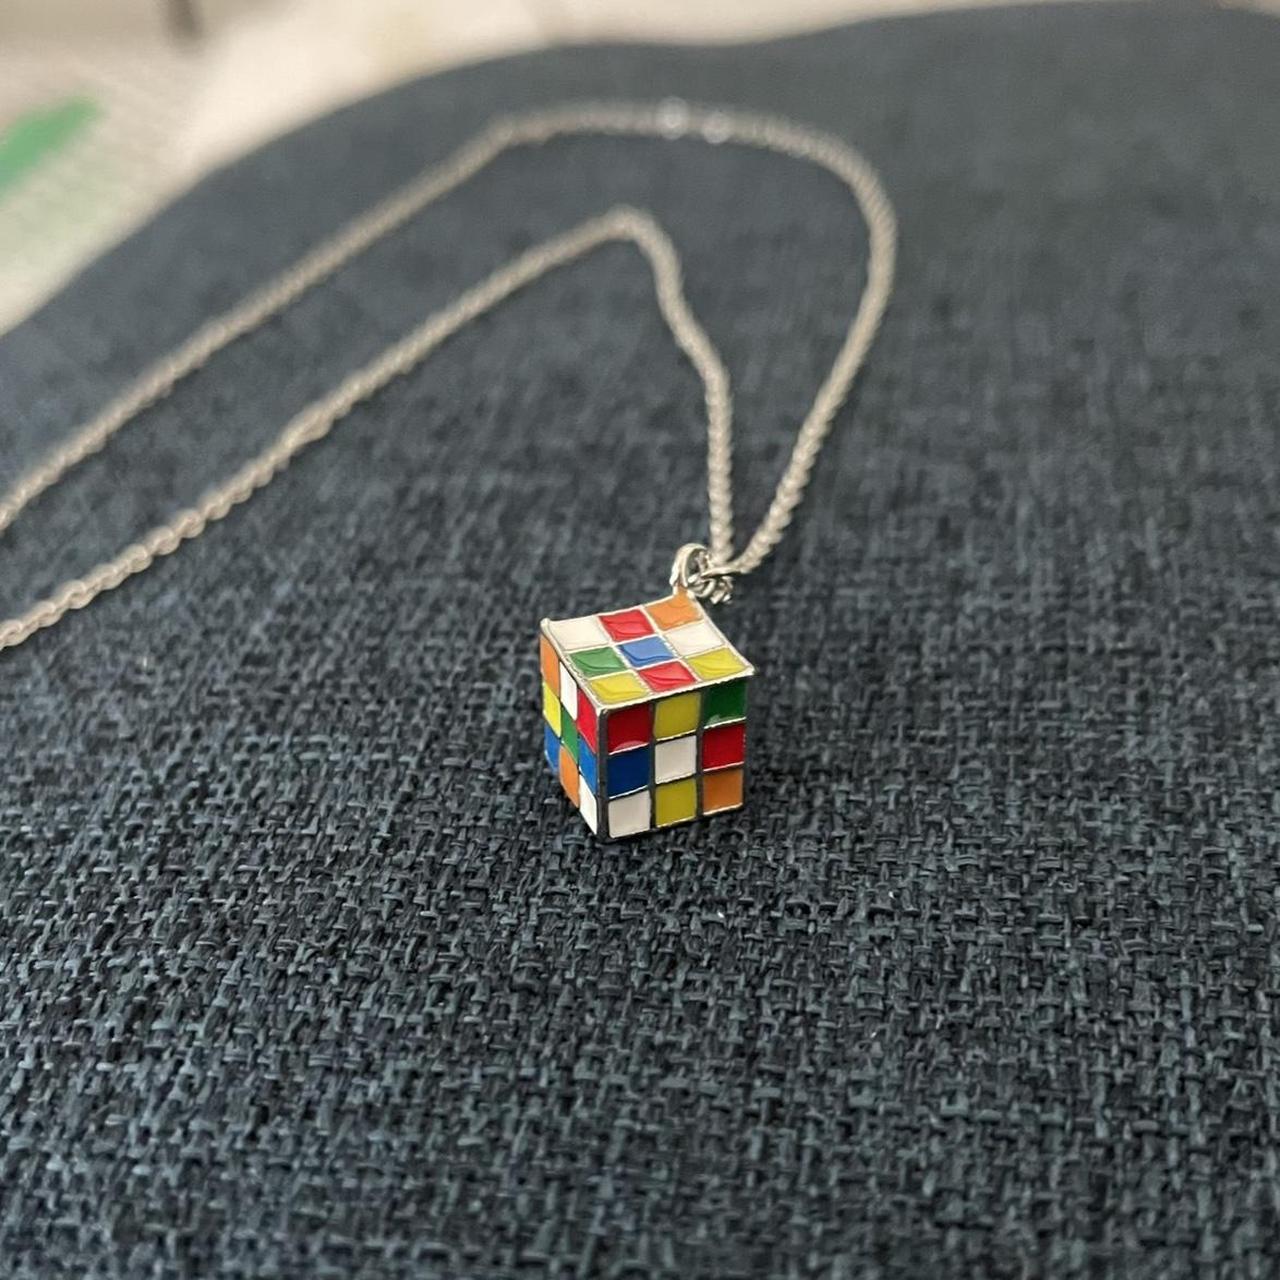 Not Just Sums: My Mathematical Jewellery Collection